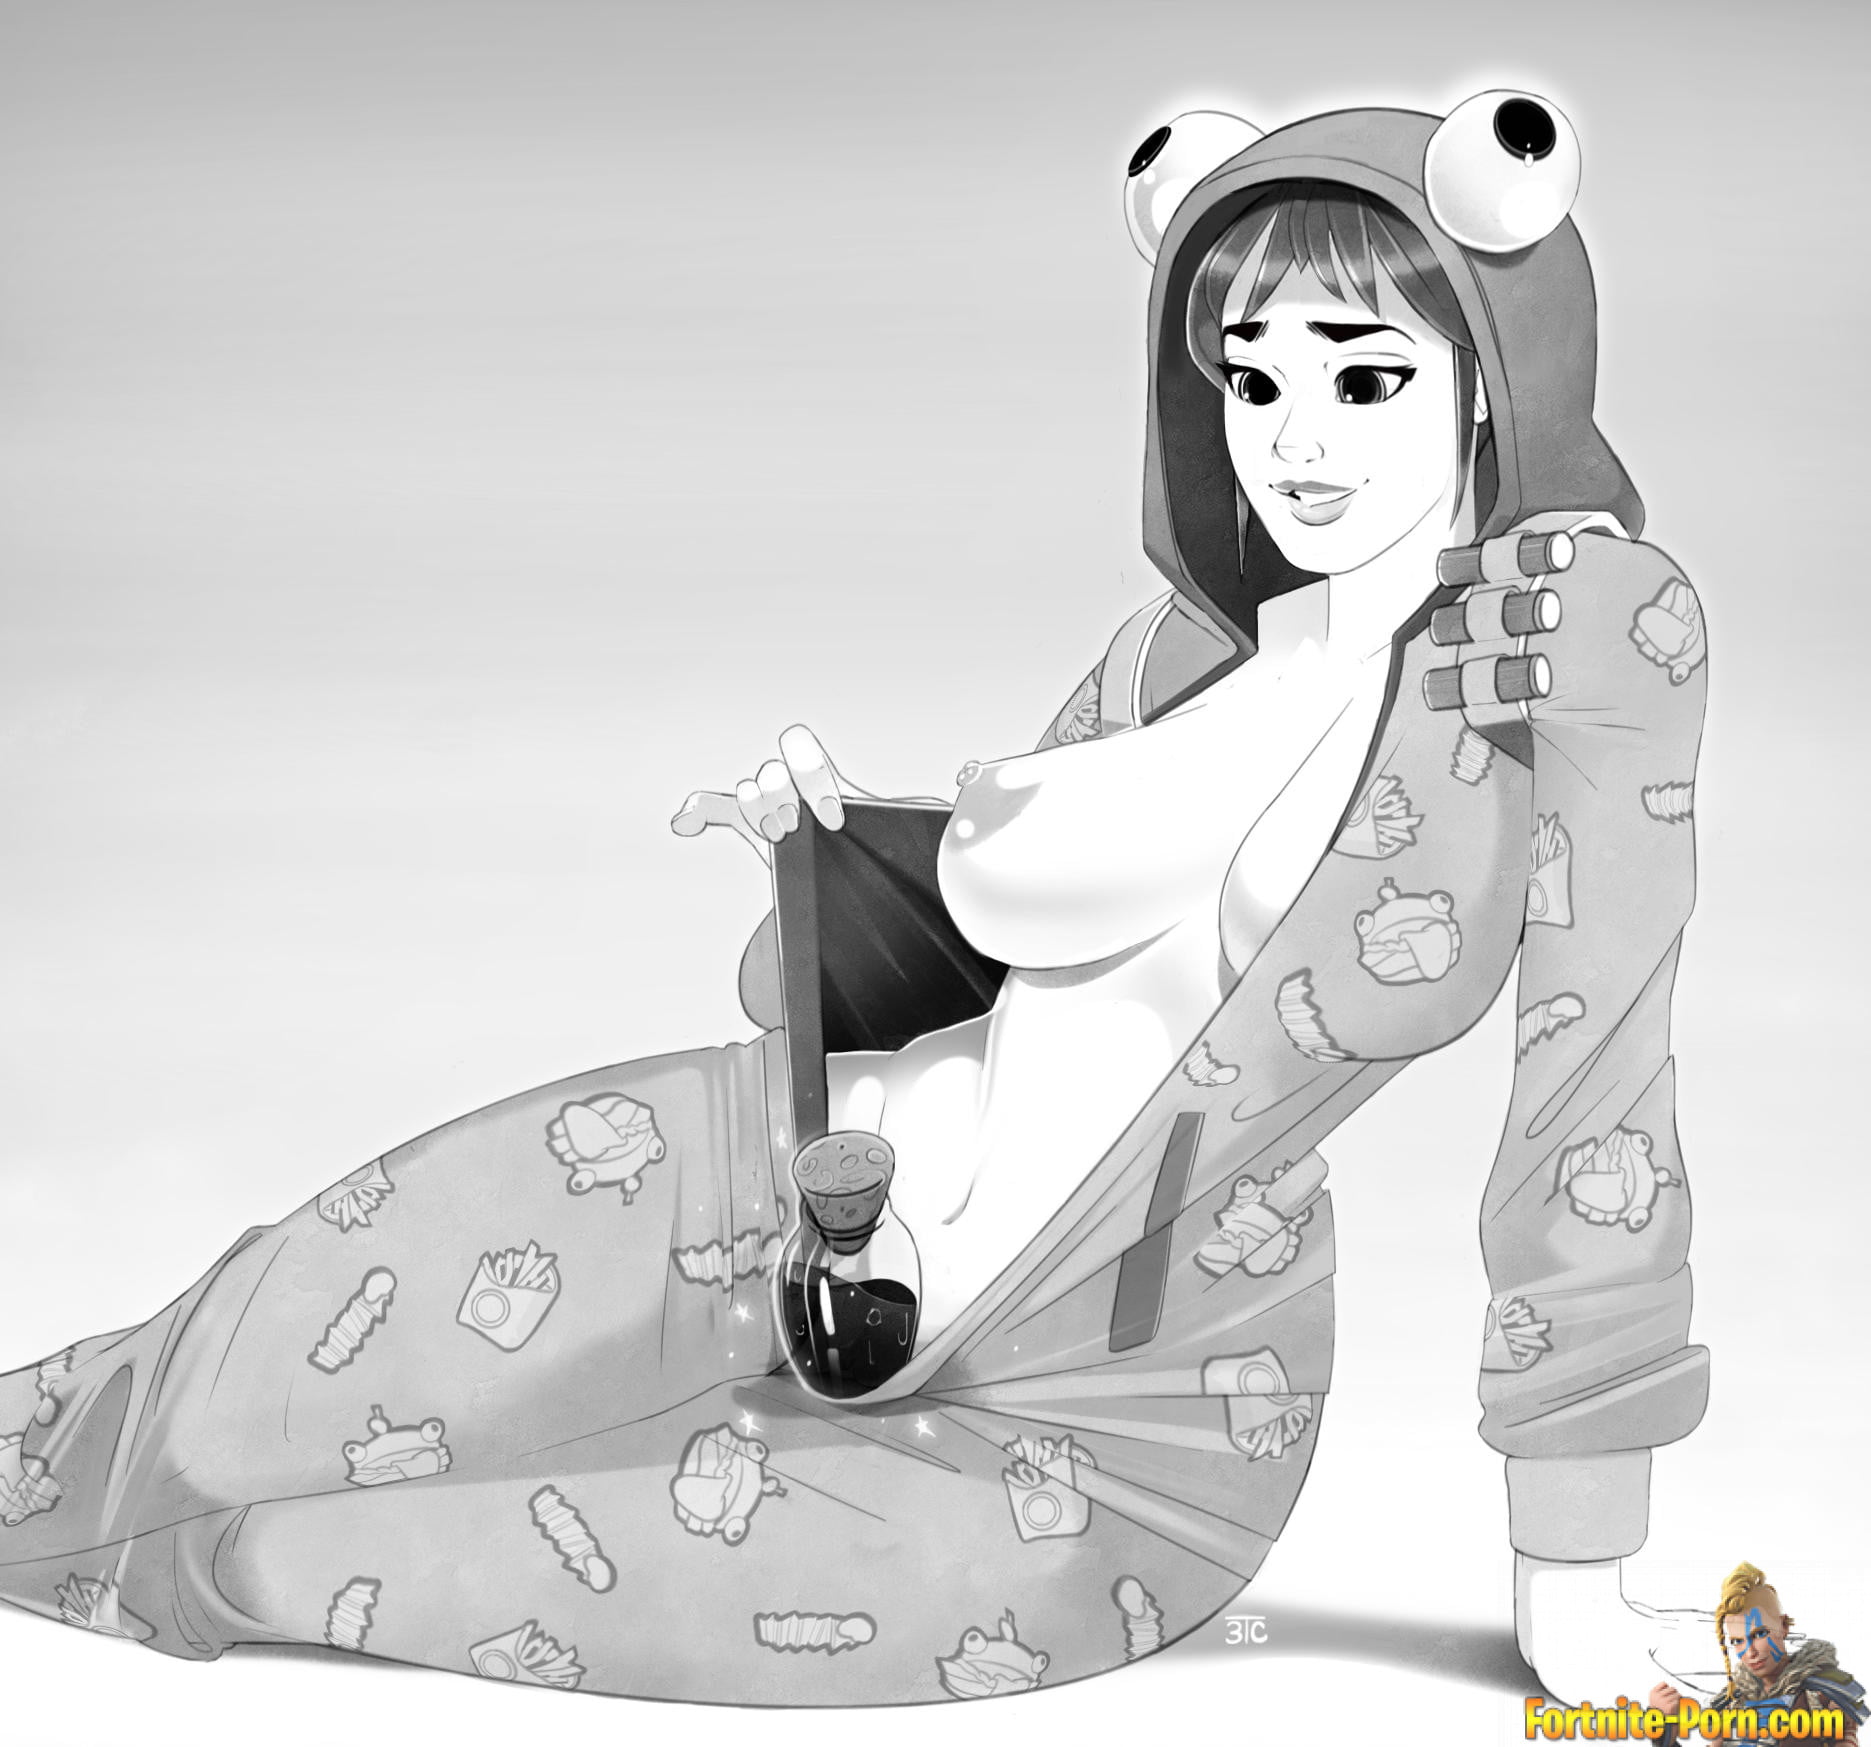 Onesie showing sexy body with the tag Onesie in category Other, Fortnite Po...